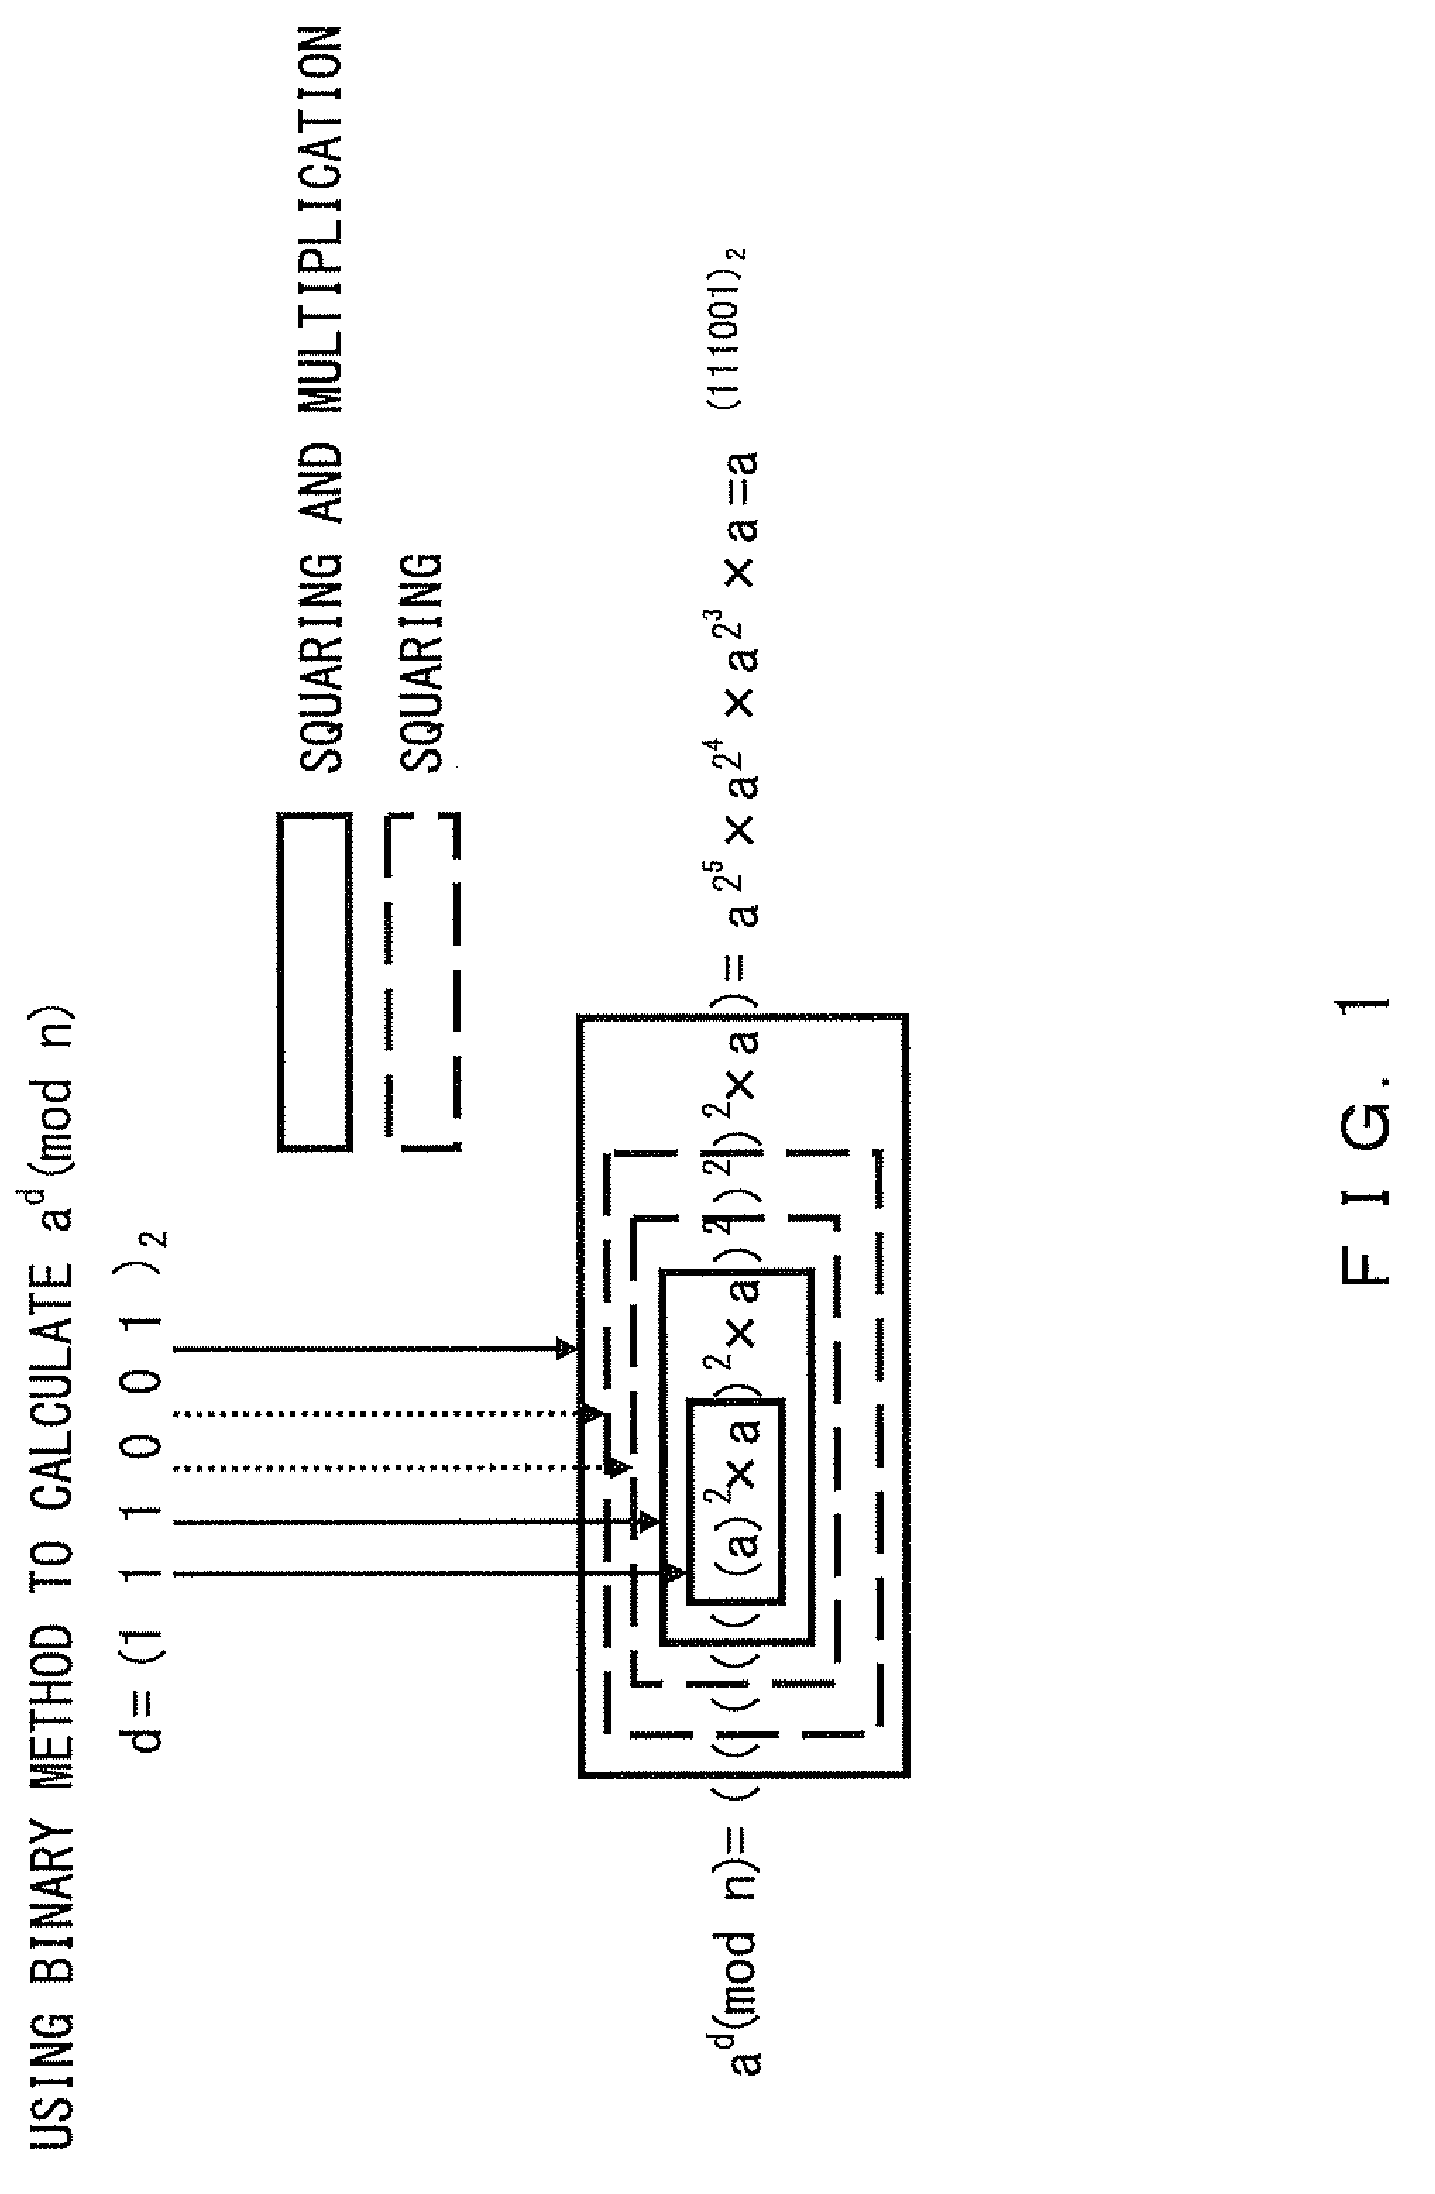 Embedded device having countermeasure function against fault attack